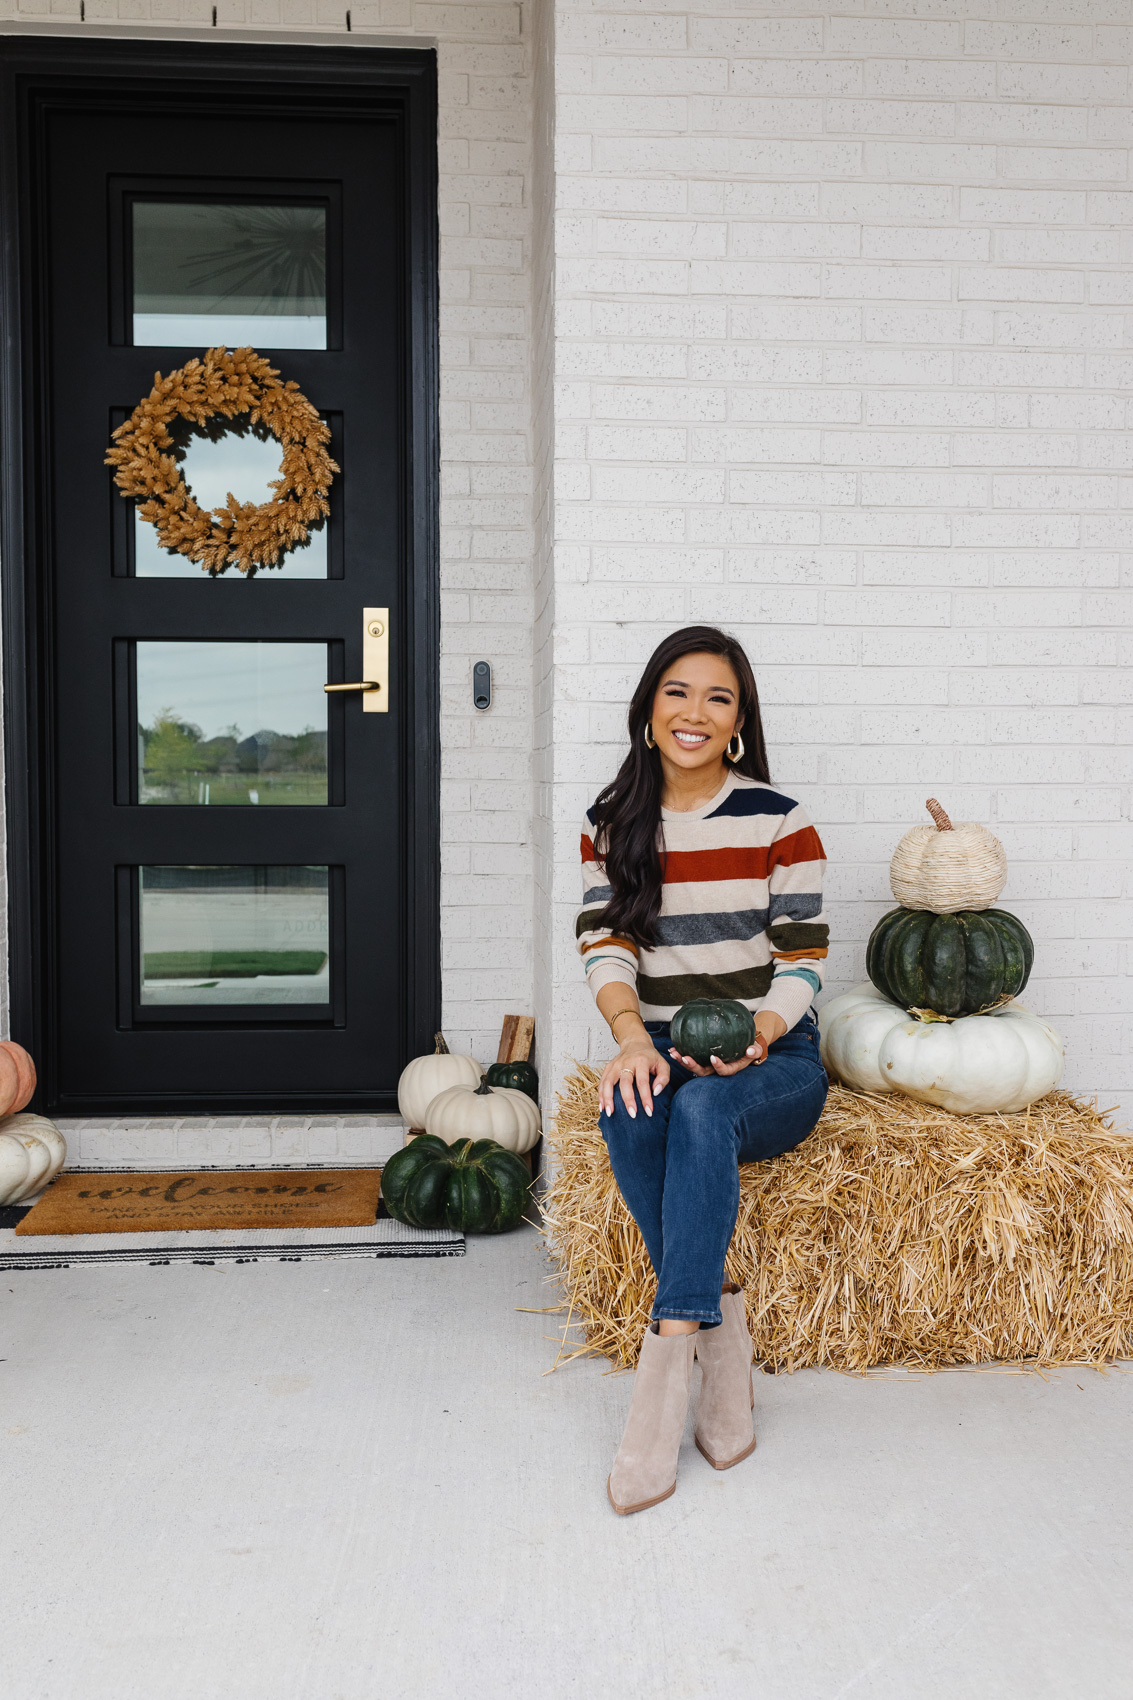 Blogger Hoang-Kim wearing a striped cashmere sweater and blue jeans on her fall front porch with white, green and pastel pumpkins and iron front door